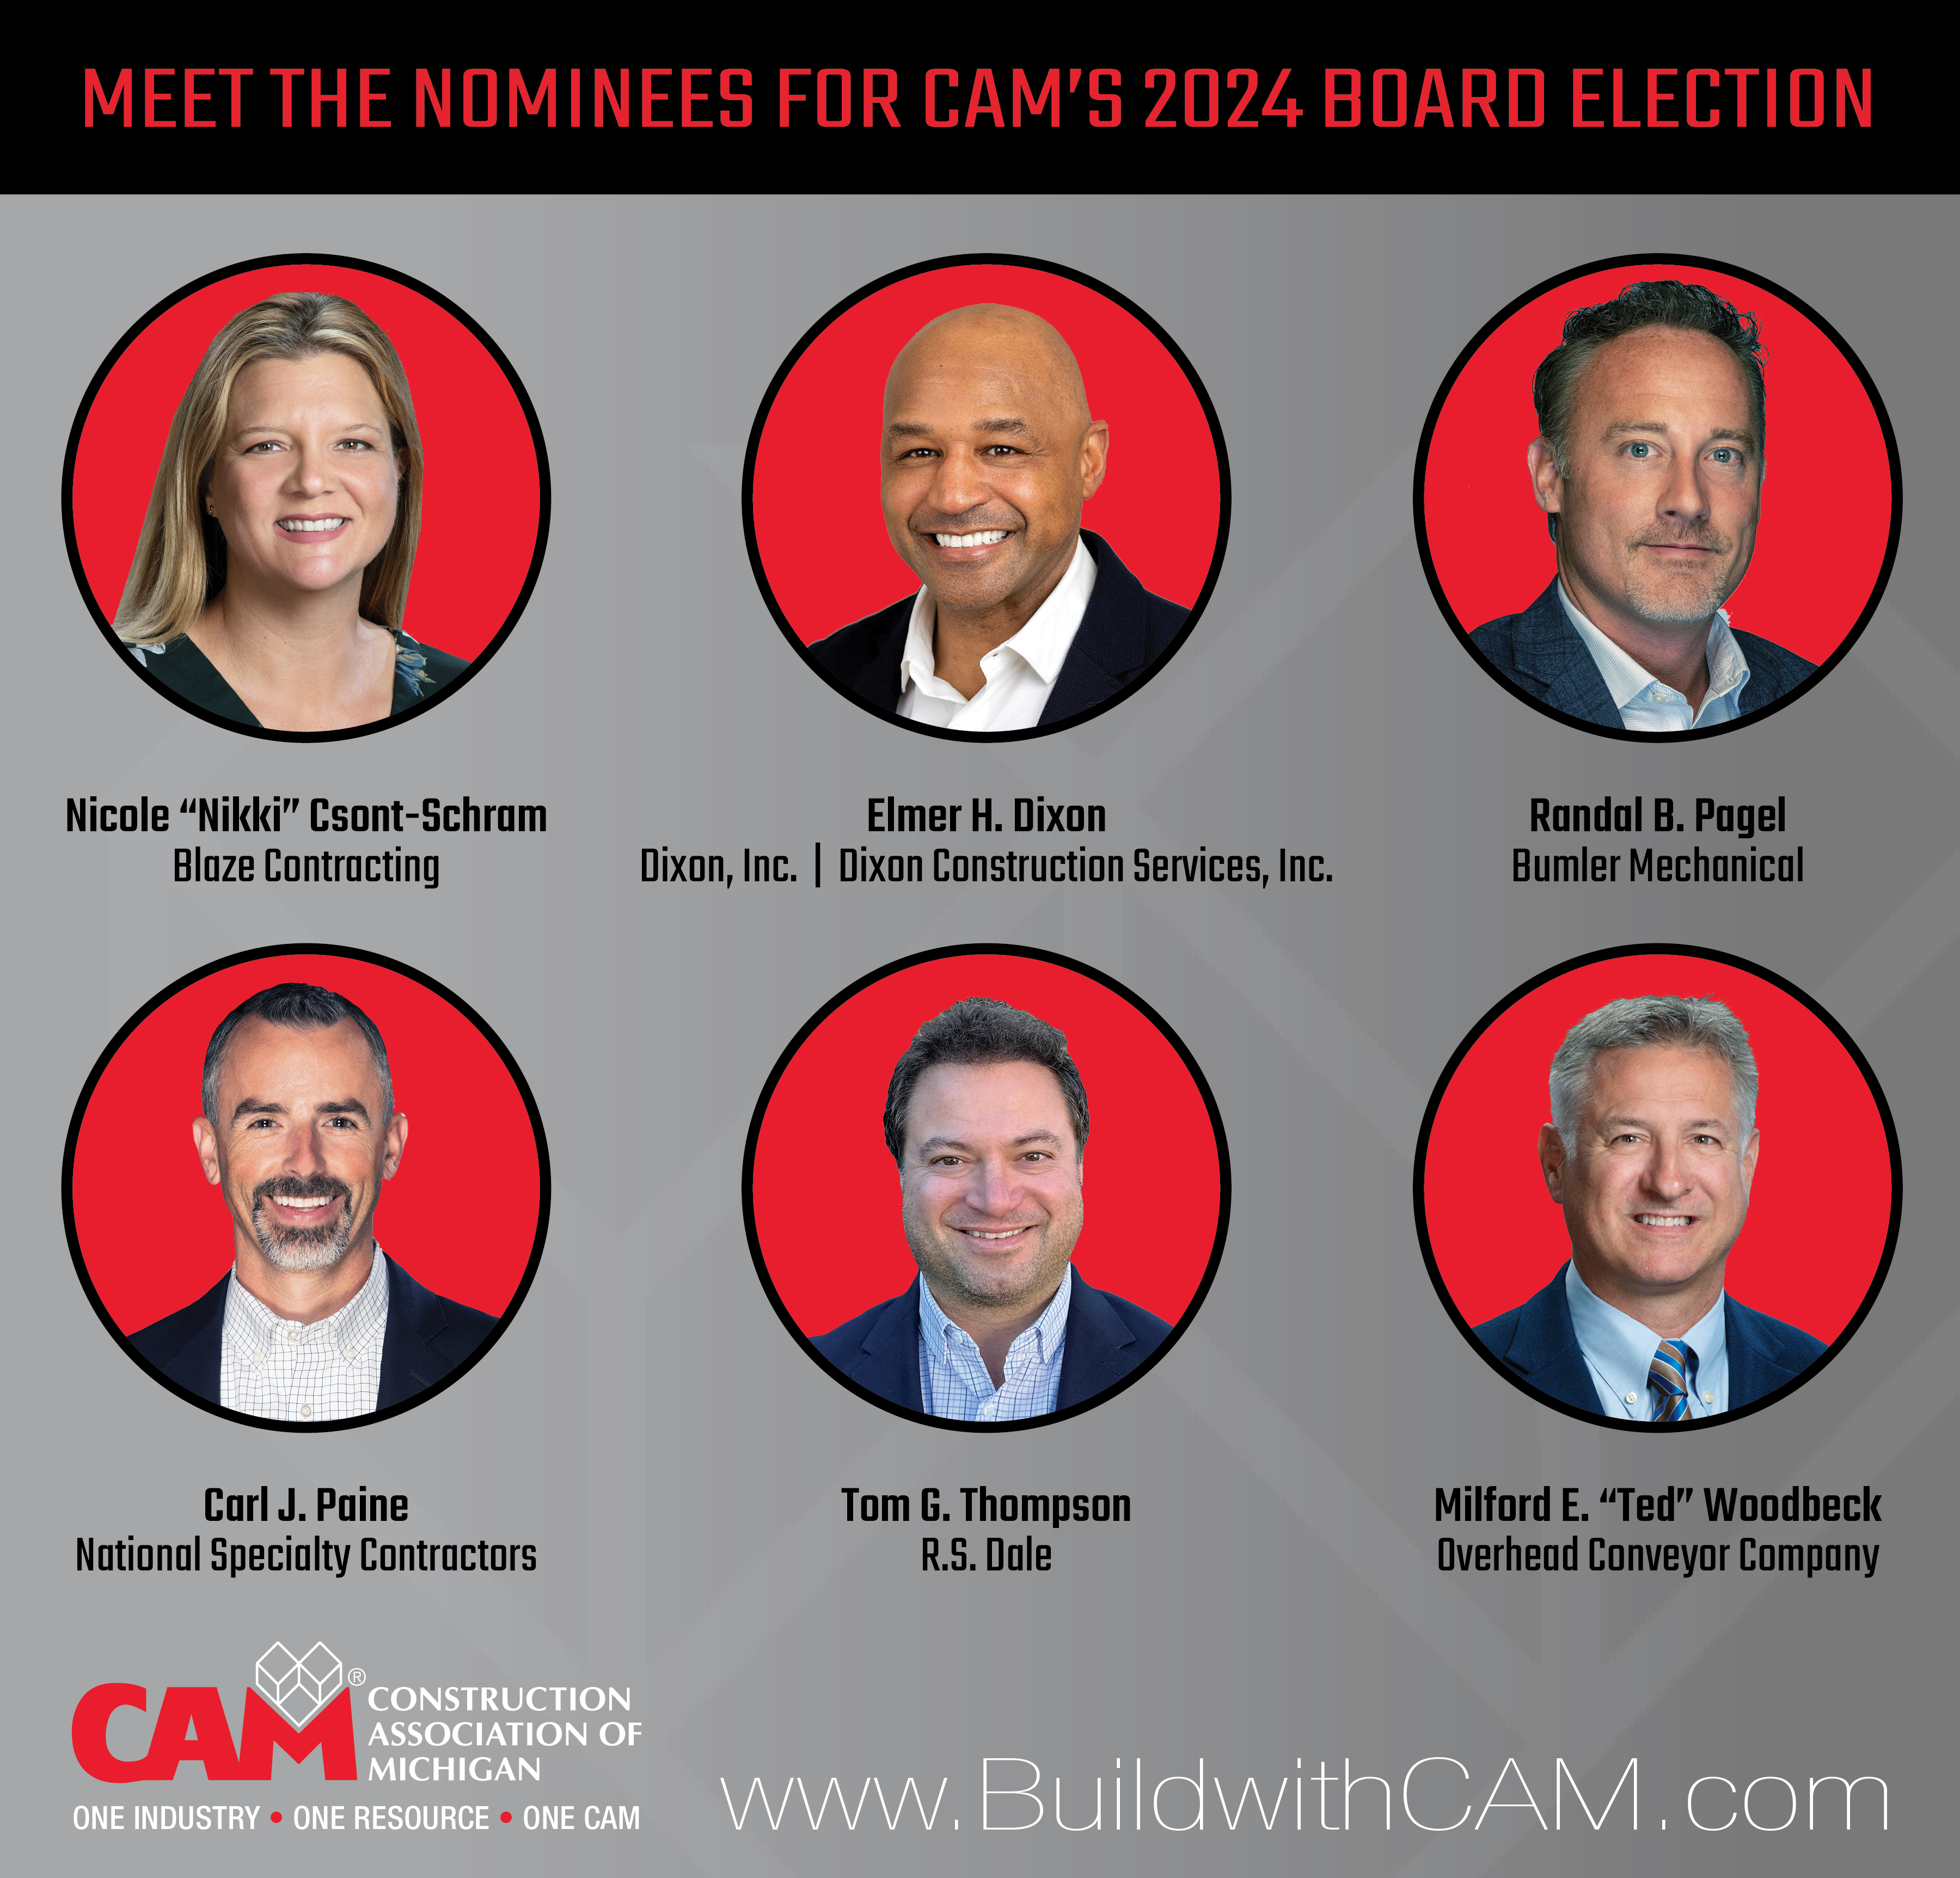 Candidates for the 2024 CAM Board of Directors